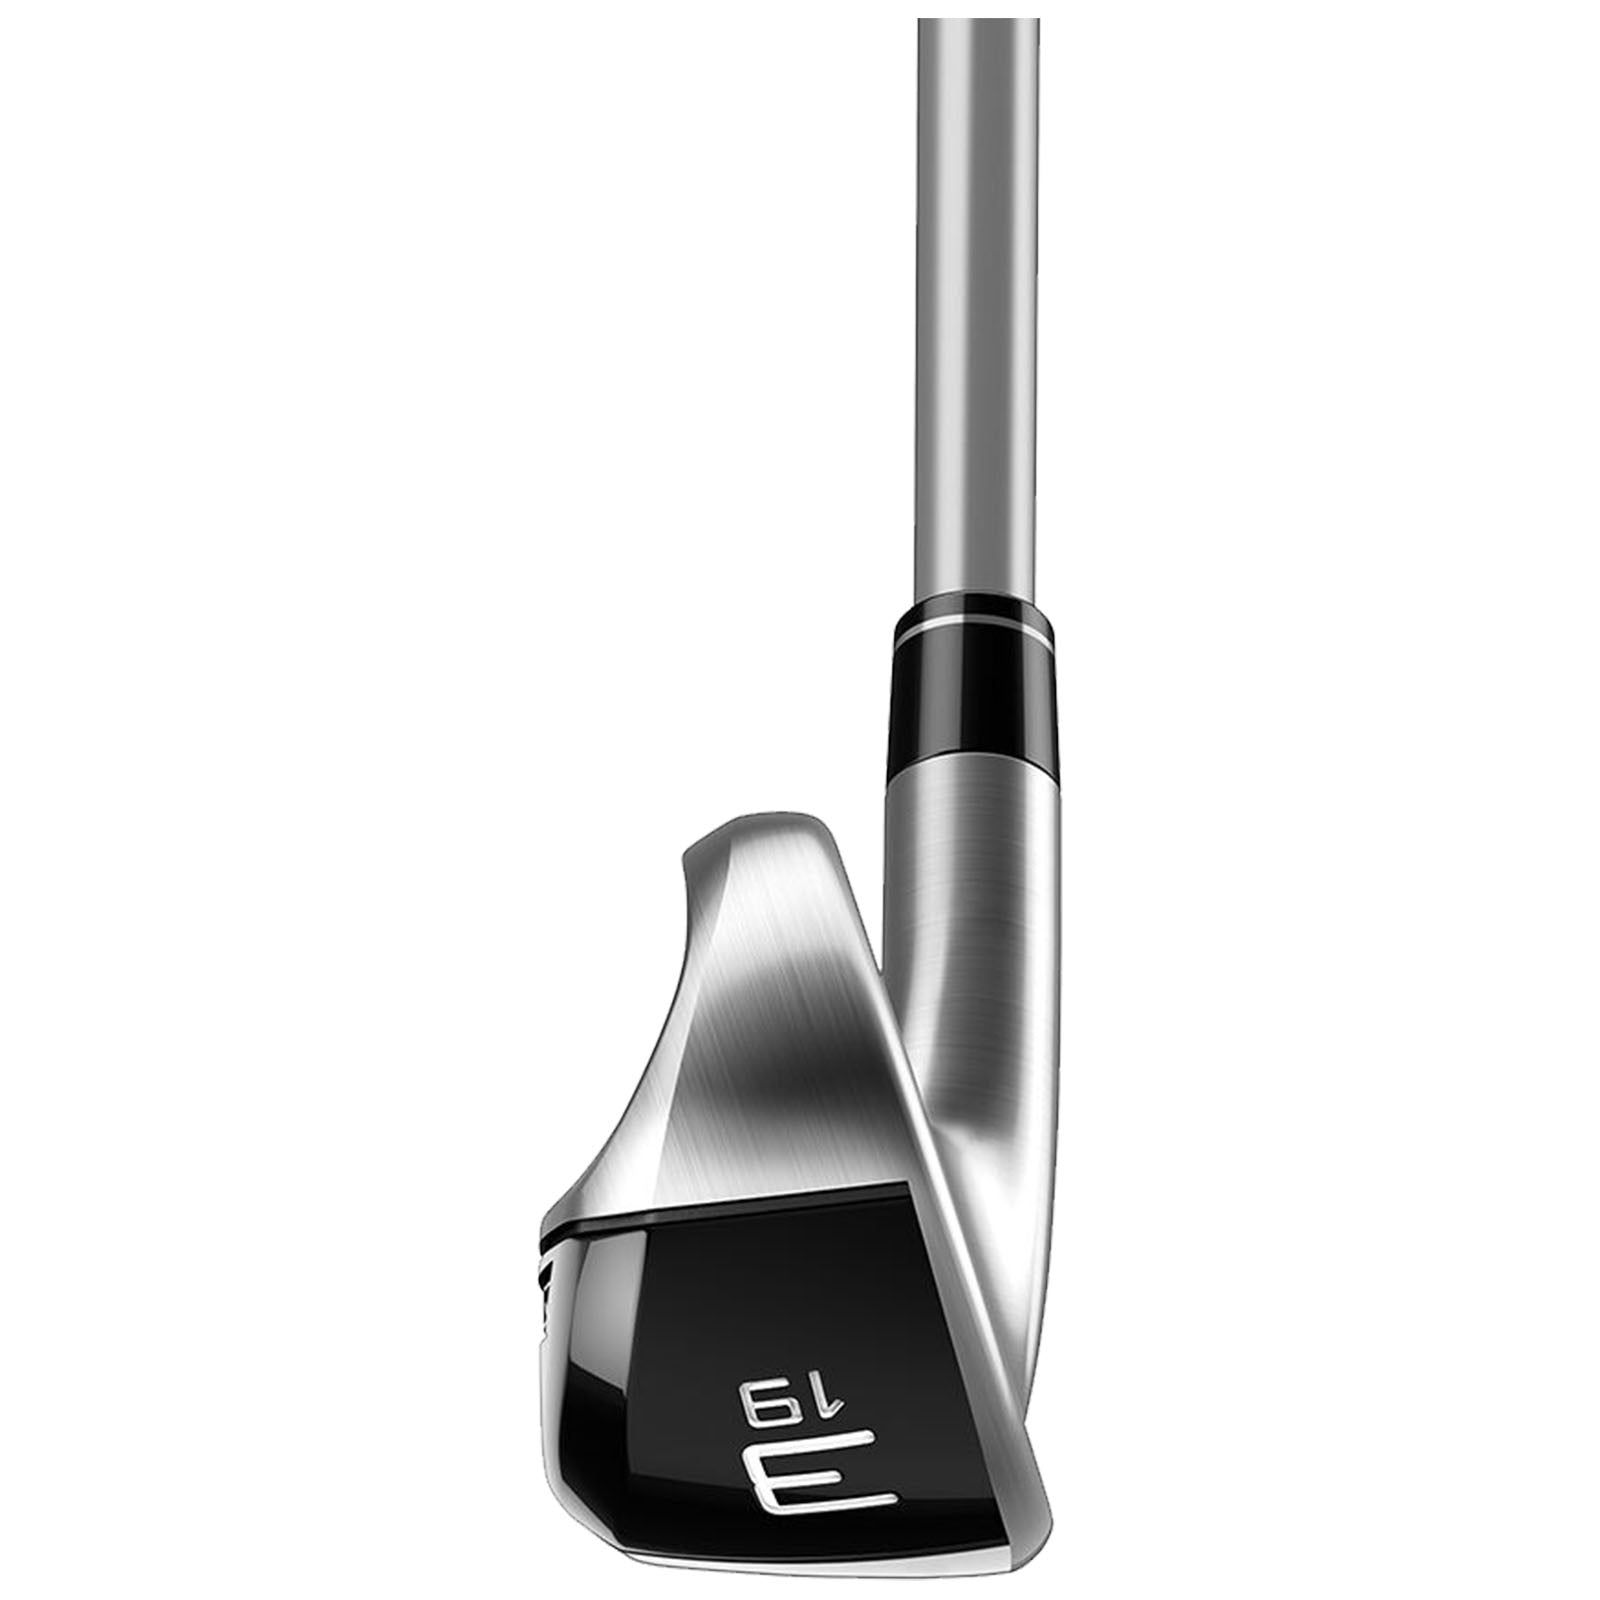 Left Handed TaylorMade Mens Stealth DHY Utility Iron